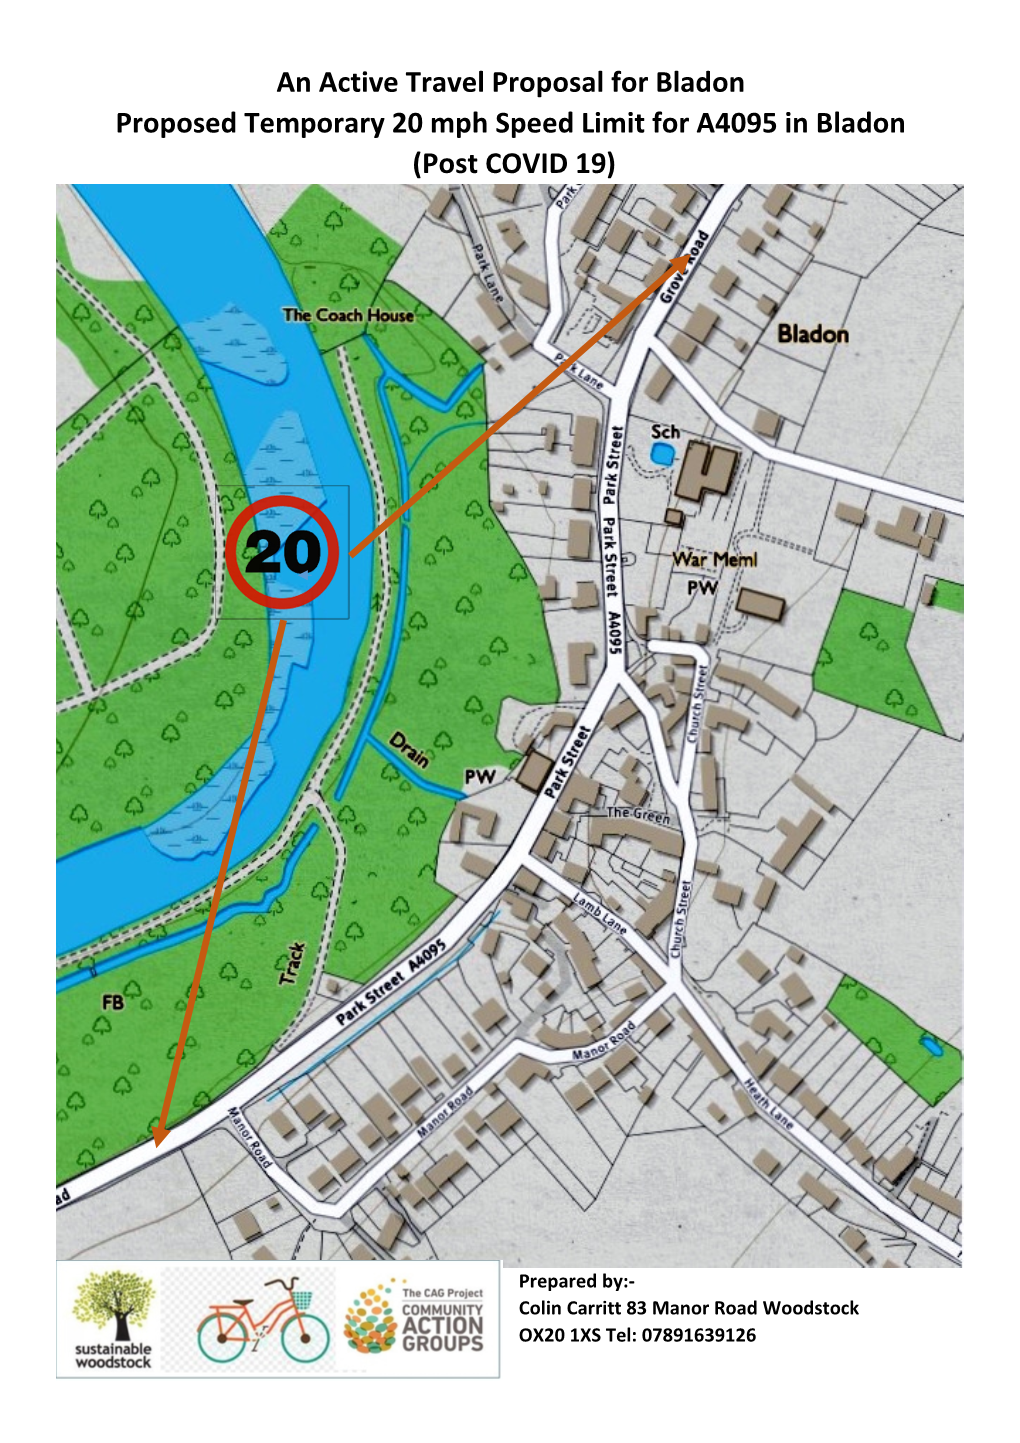 An Active Travel Proposal for Bladon Proposed Temporary 20 Mph Speed Limit for A4095 in Bladon (Post COVID 19)